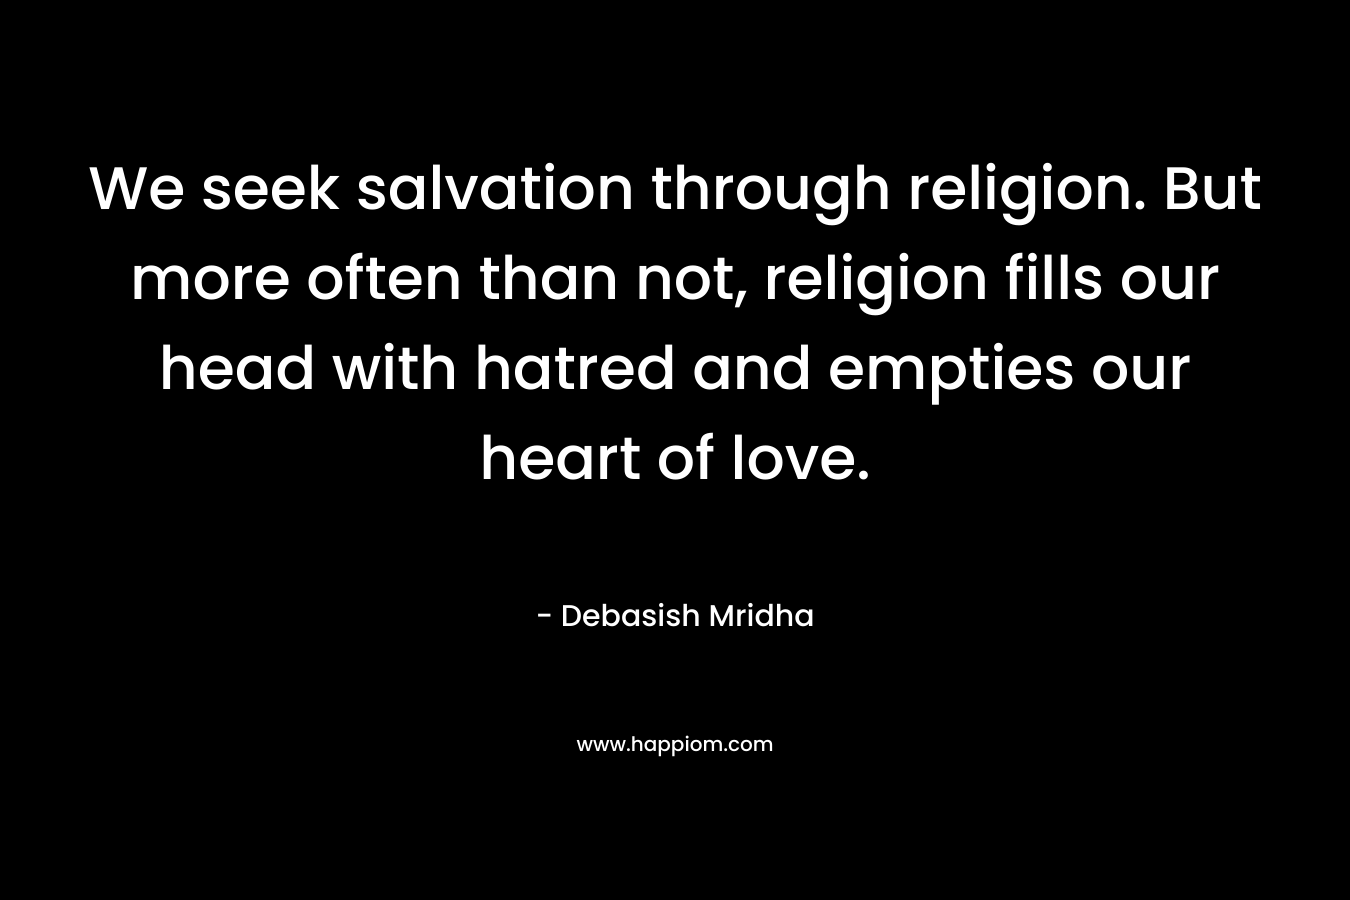 We seek salvation through religion. But more often than not, religion fills our head with hatred and empties our heart of love.